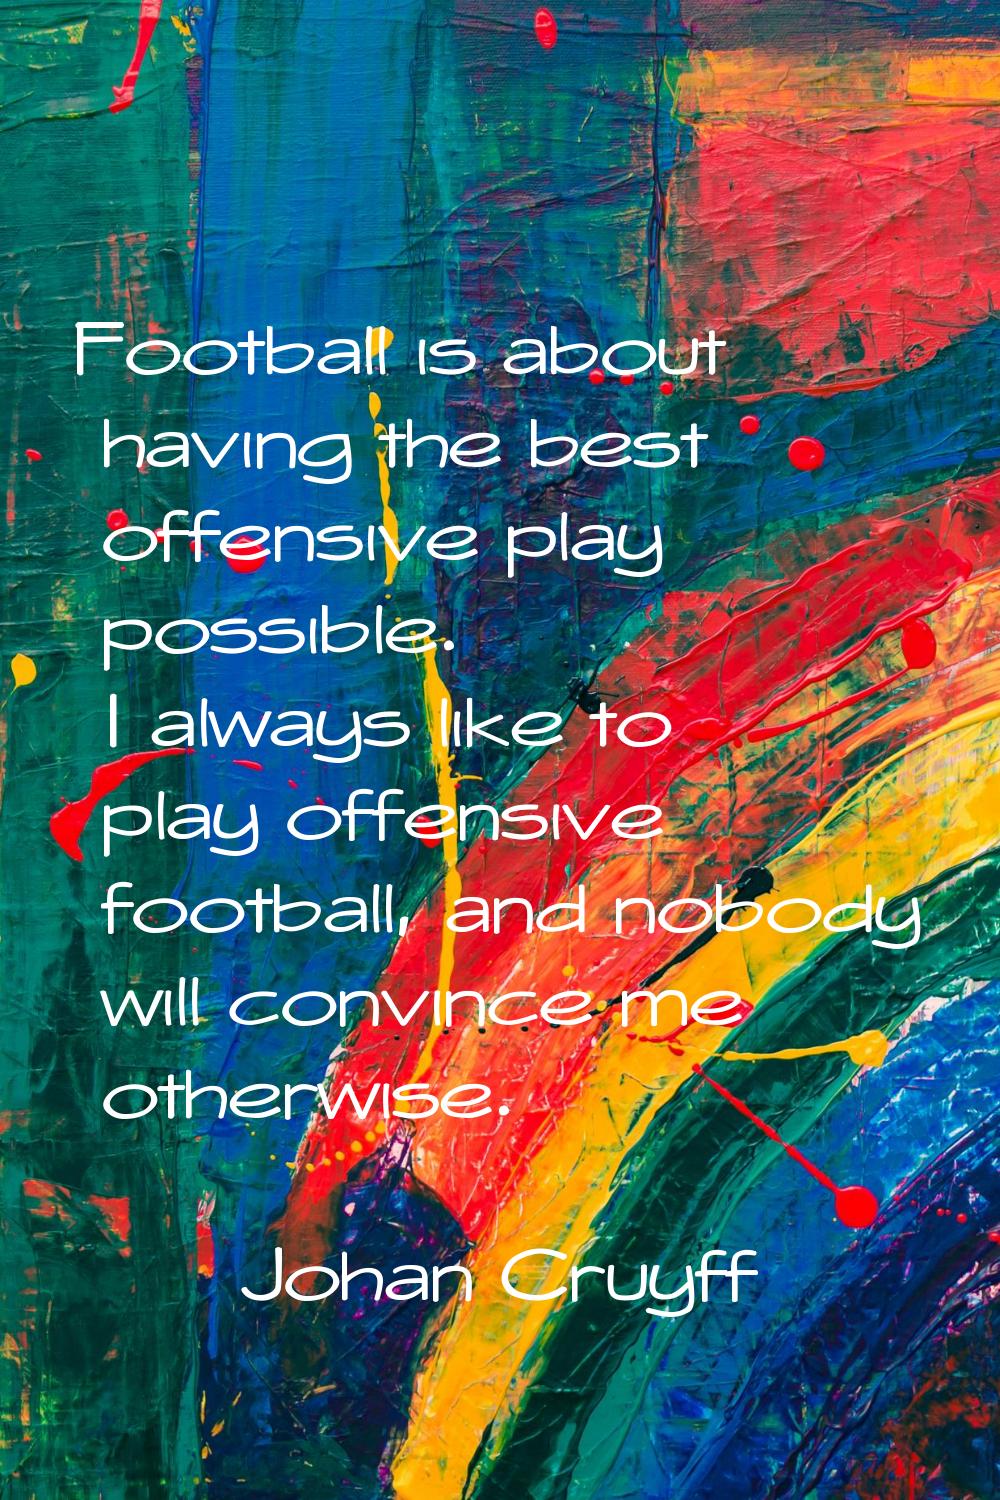 Football is about having the best offensive play possible. I always like to play offensive football